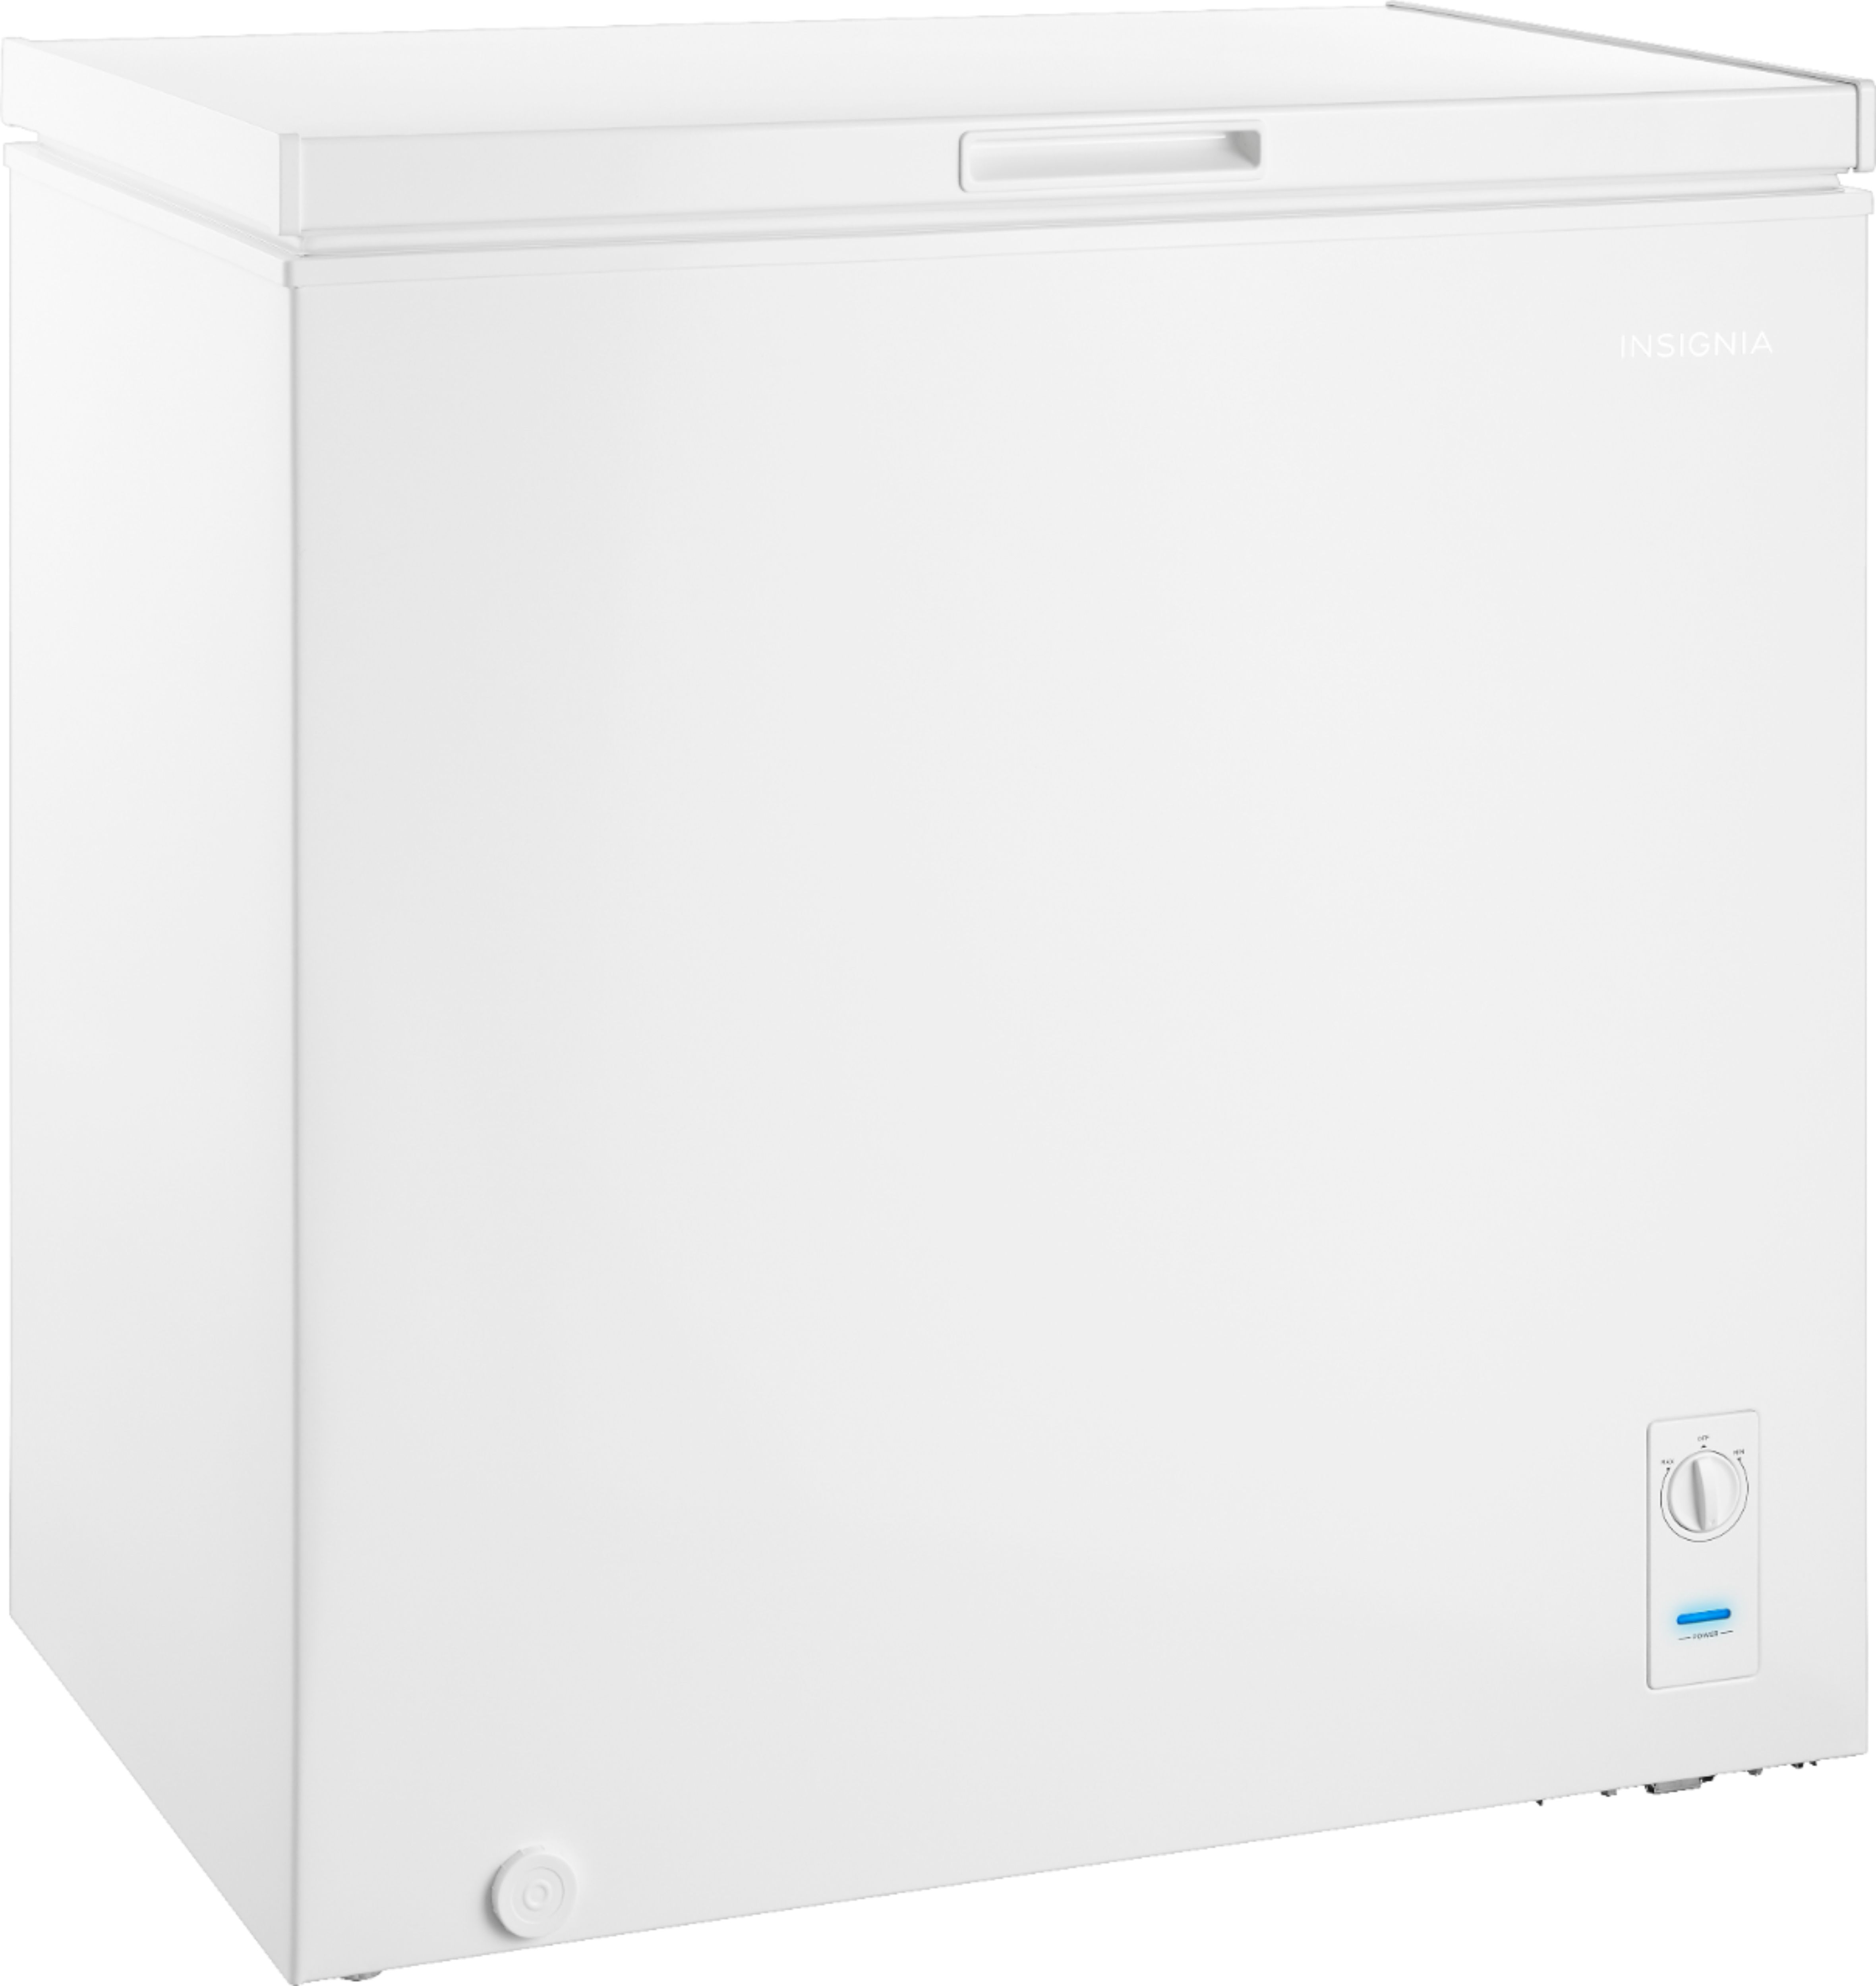 Angle View: Monogram - 21.9 Cu. Ft. Upright Freezer - Stainless Steel